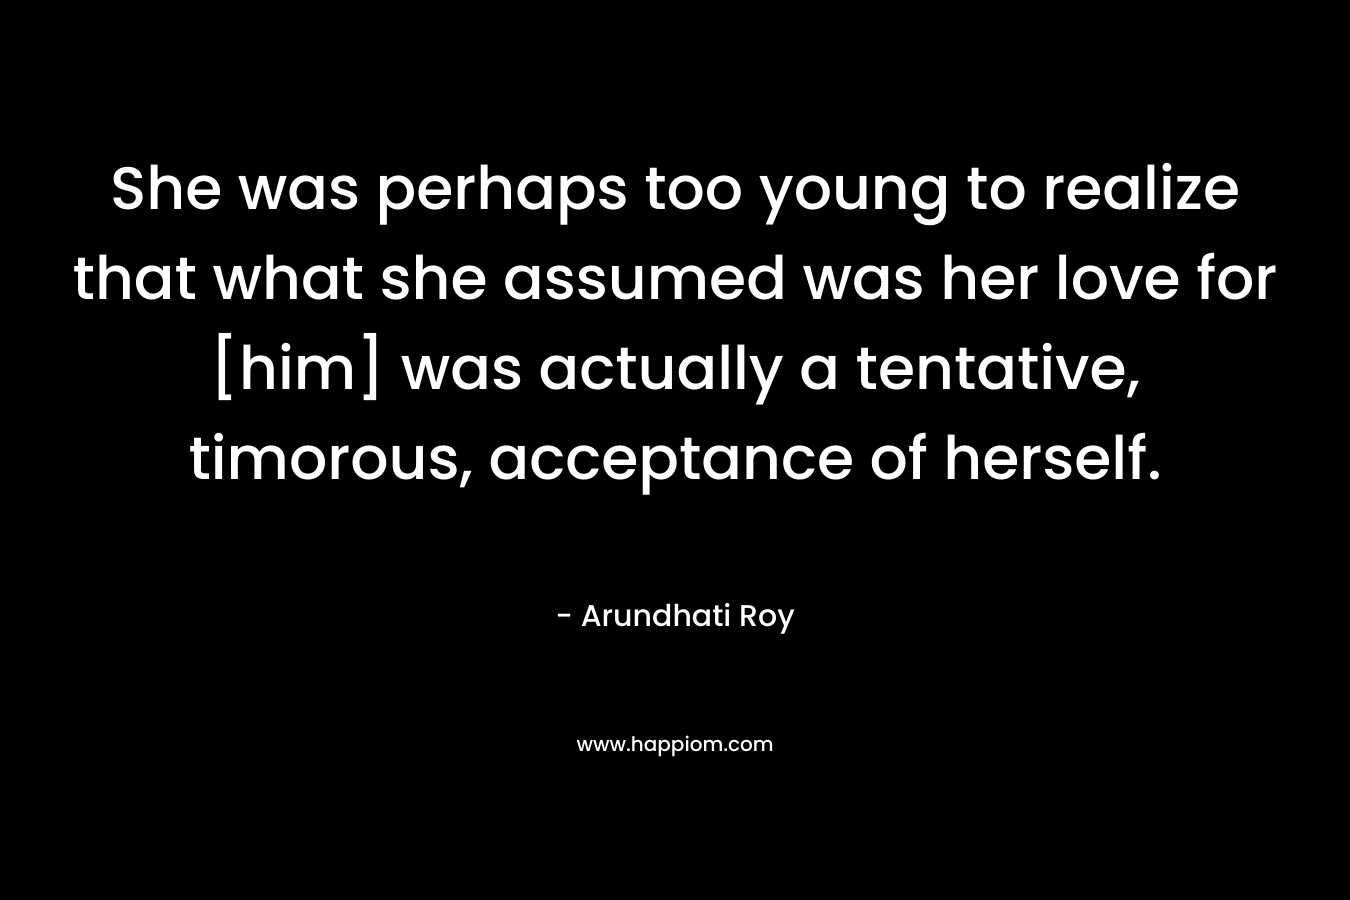 She was perhaps too young to realize that what she assumed was her love for [him] was actually a tentative, timorous, acceptance of herself. – Arundhati Roy